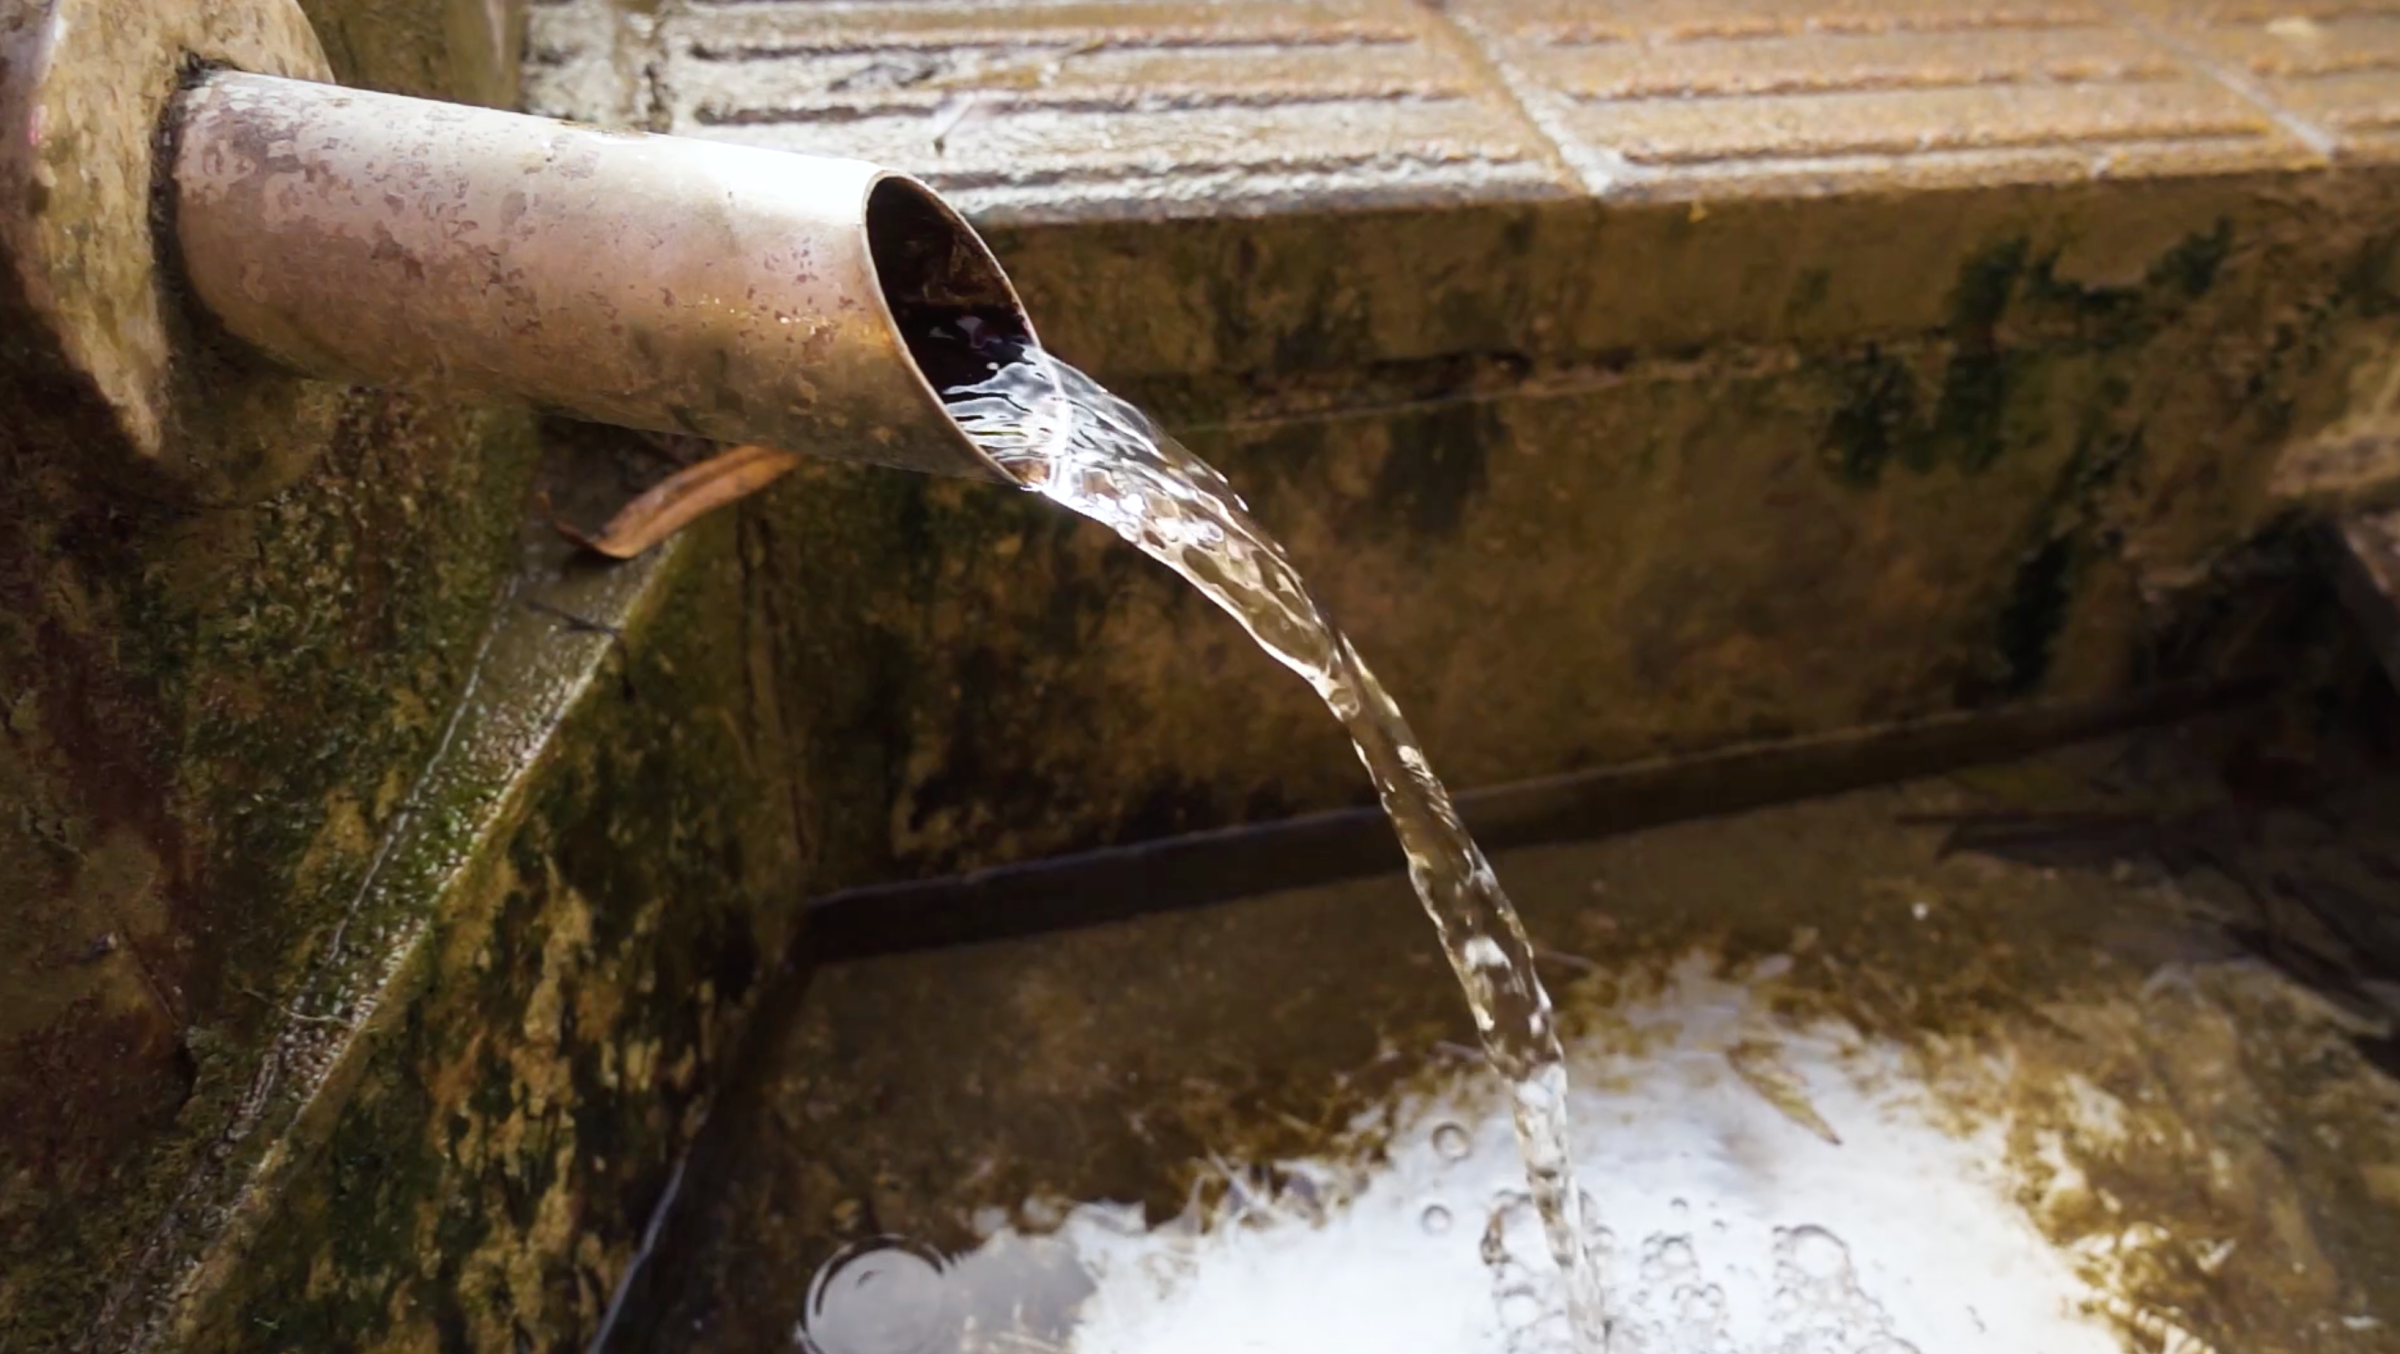 Water flowing out of a drainage pipe